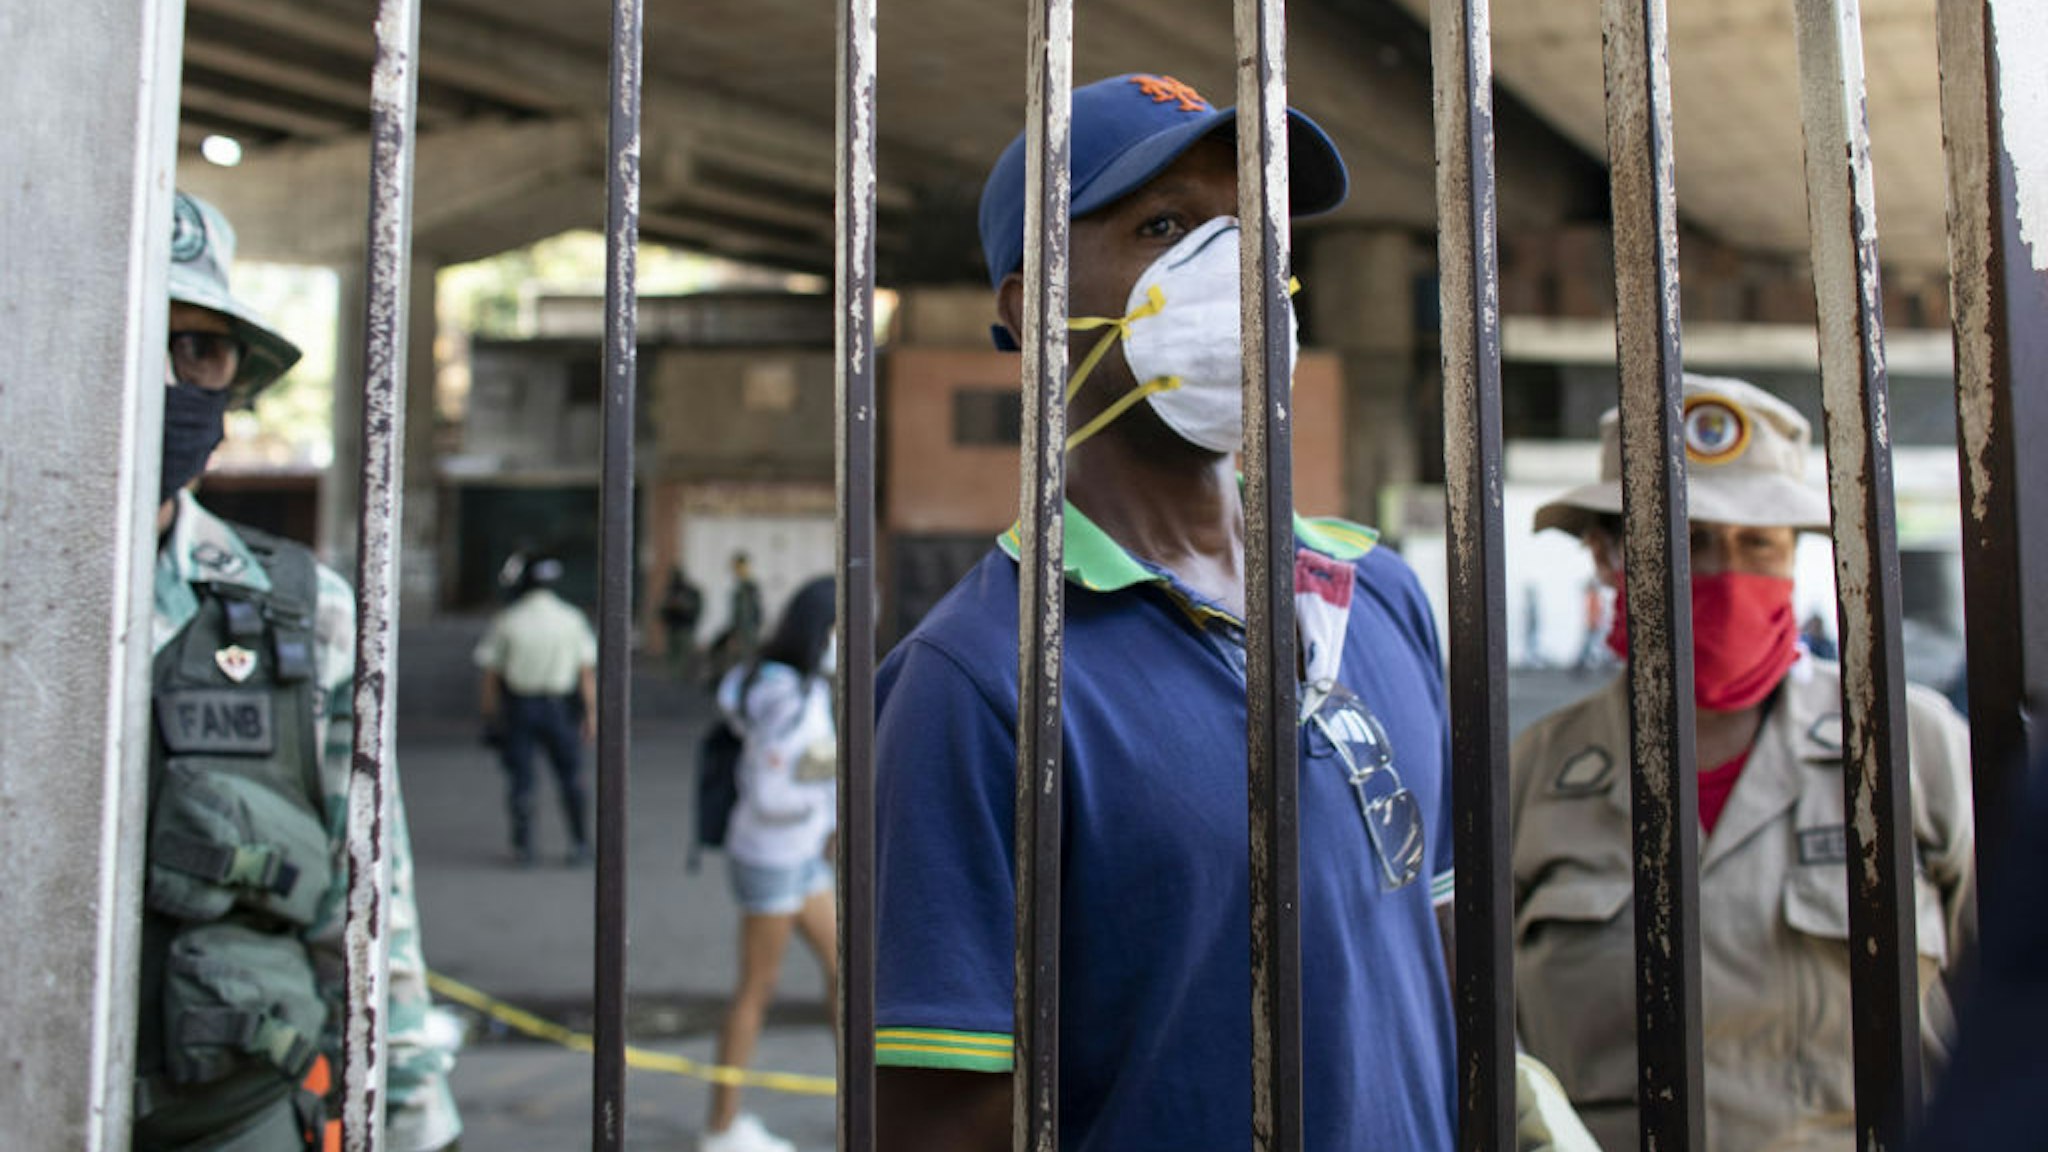 A person wearing a protective mask waits behind a security gate outside of the Ana Francisca Perez de Leon Hospital in the Petare neighborhood of Caracas, Venezuela, on Wednesday, April 15, 2020.